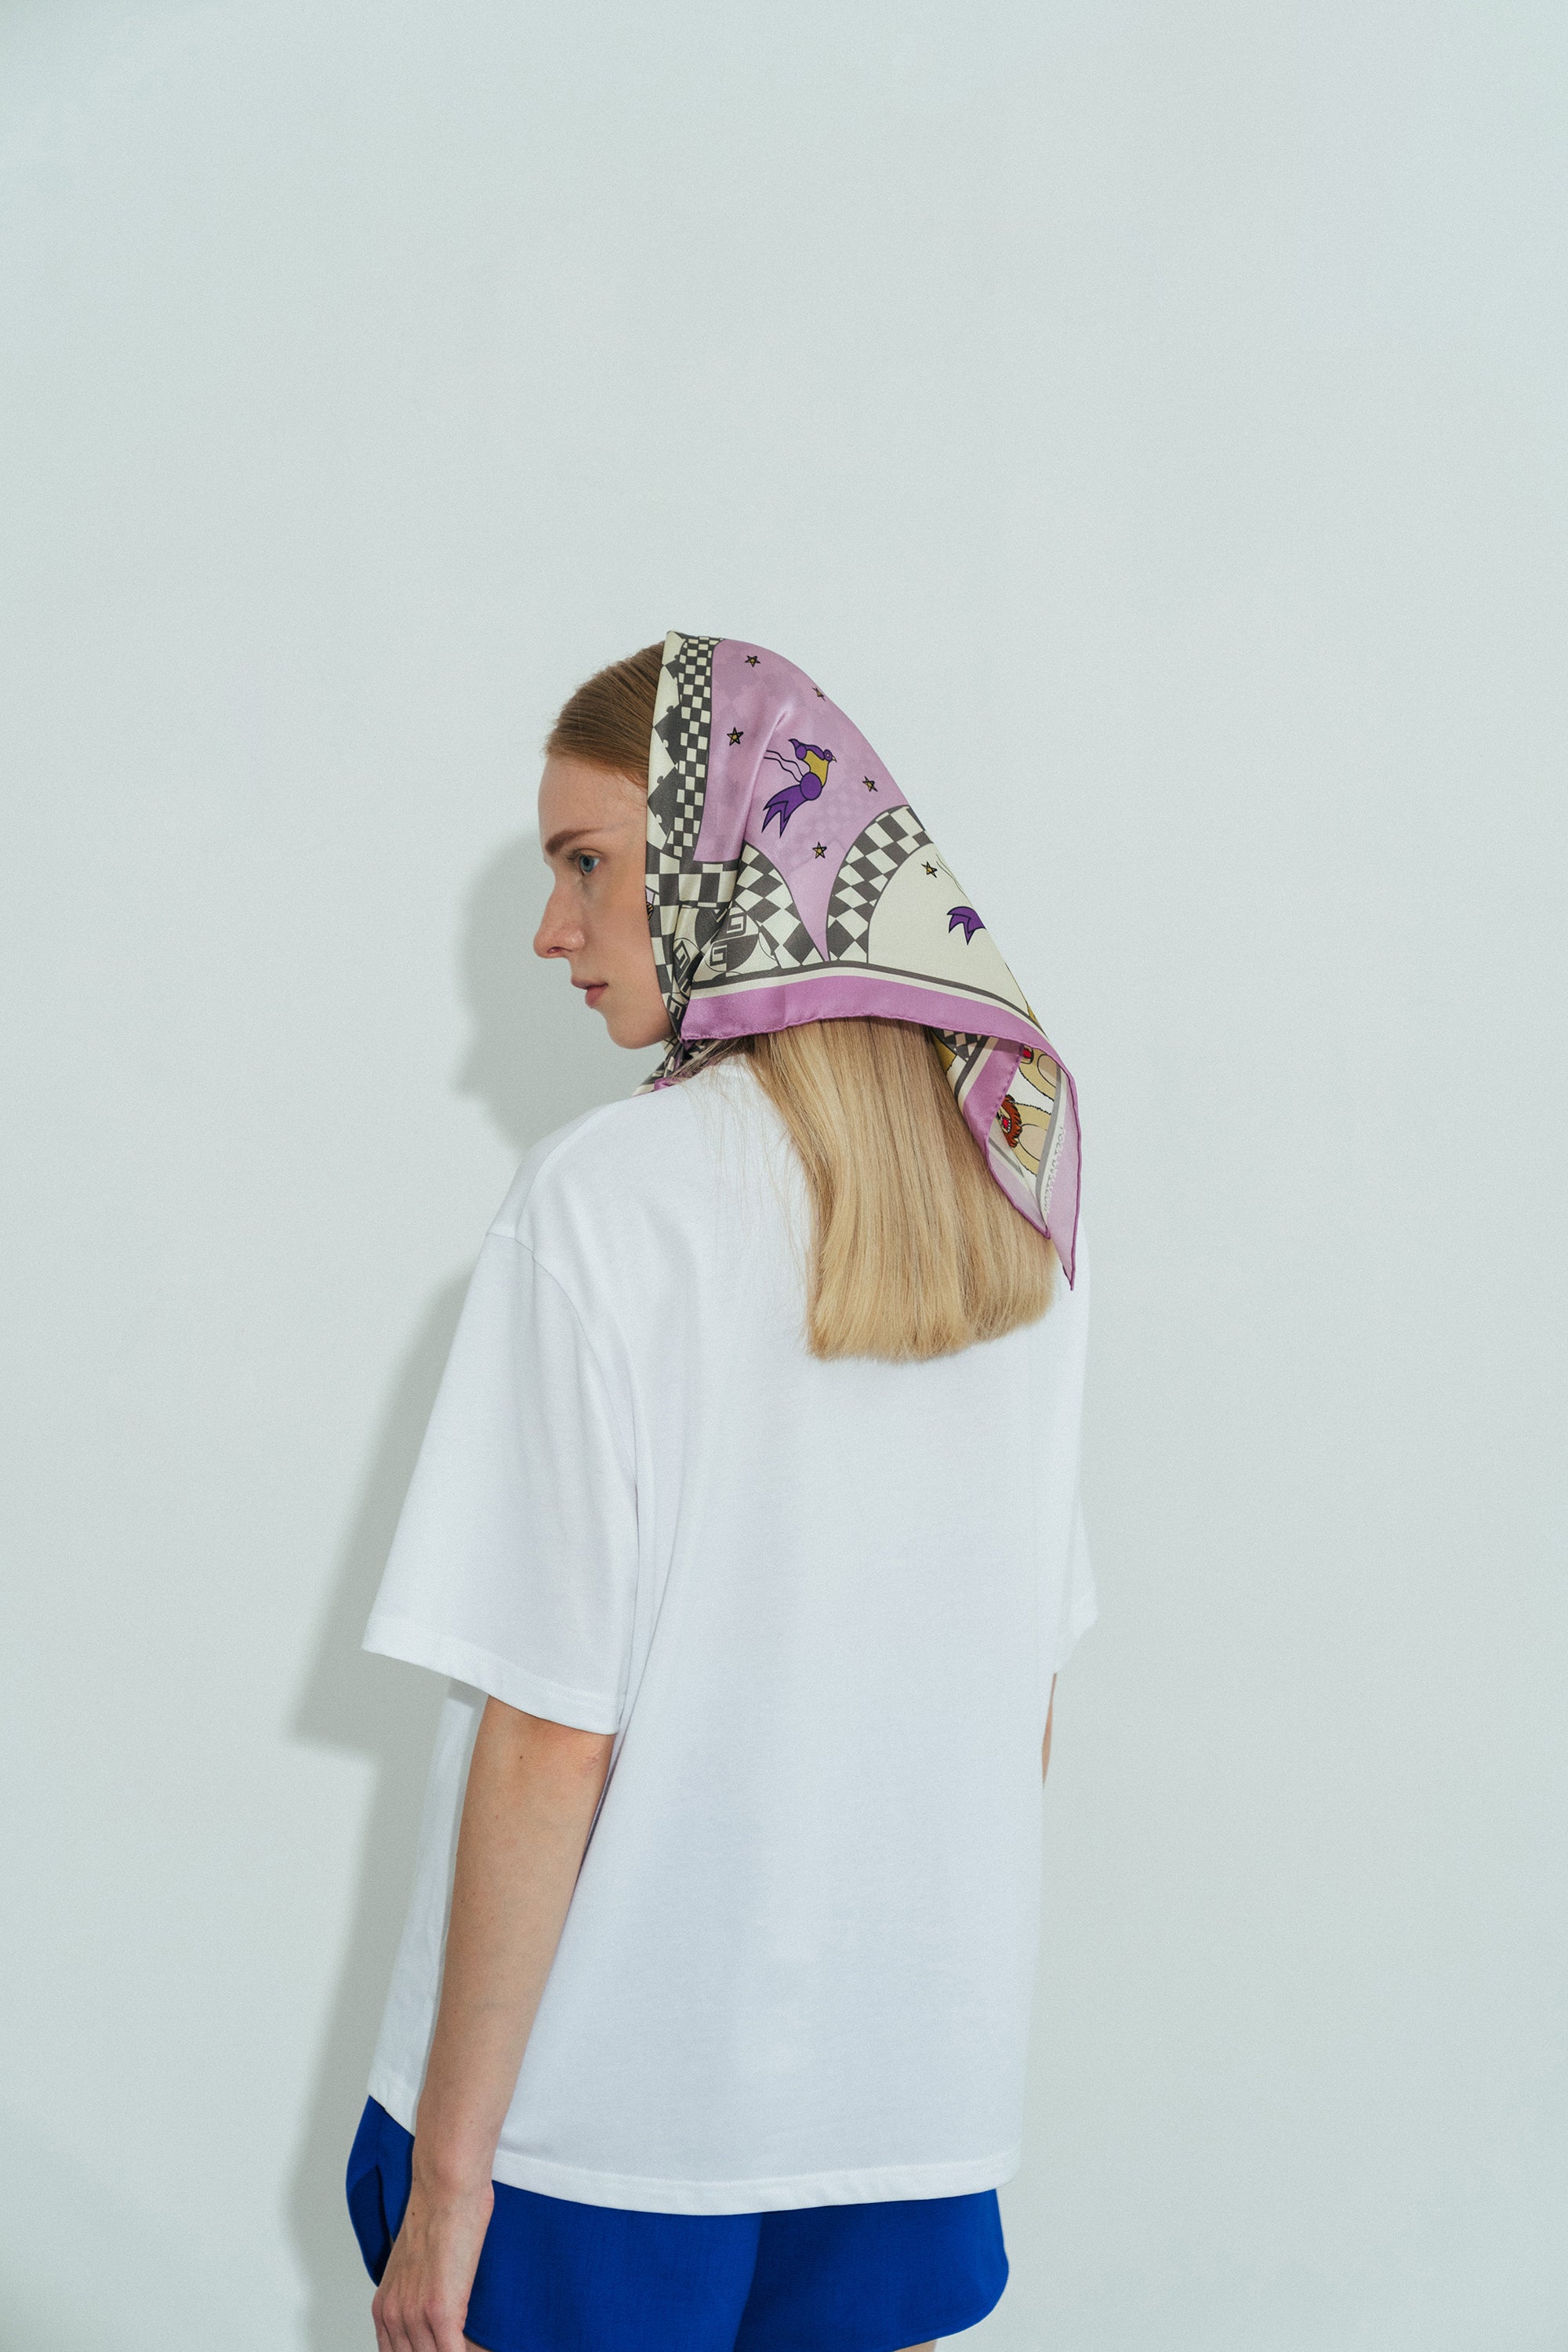 "Journey" Silk Scarf by SHANTALL LACAYO - Lavender Pink - LOST PATTERN Silk Square Scarf